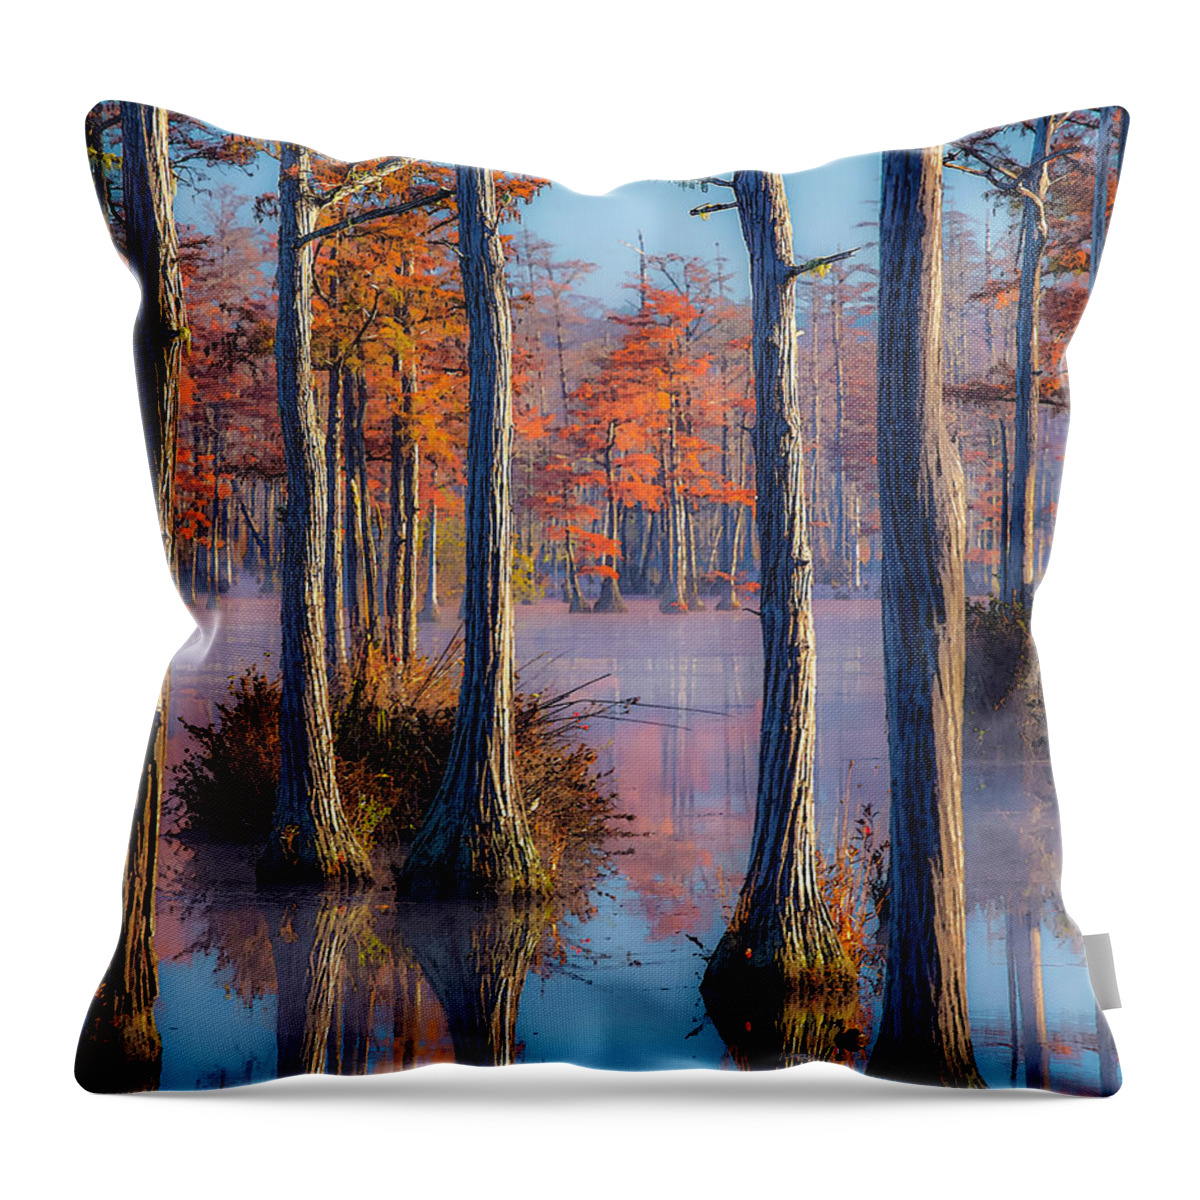 Cypress Trees Throw Pillow featuring the photograph Adams Mill Pond Panorama 09 by Jim Dollar